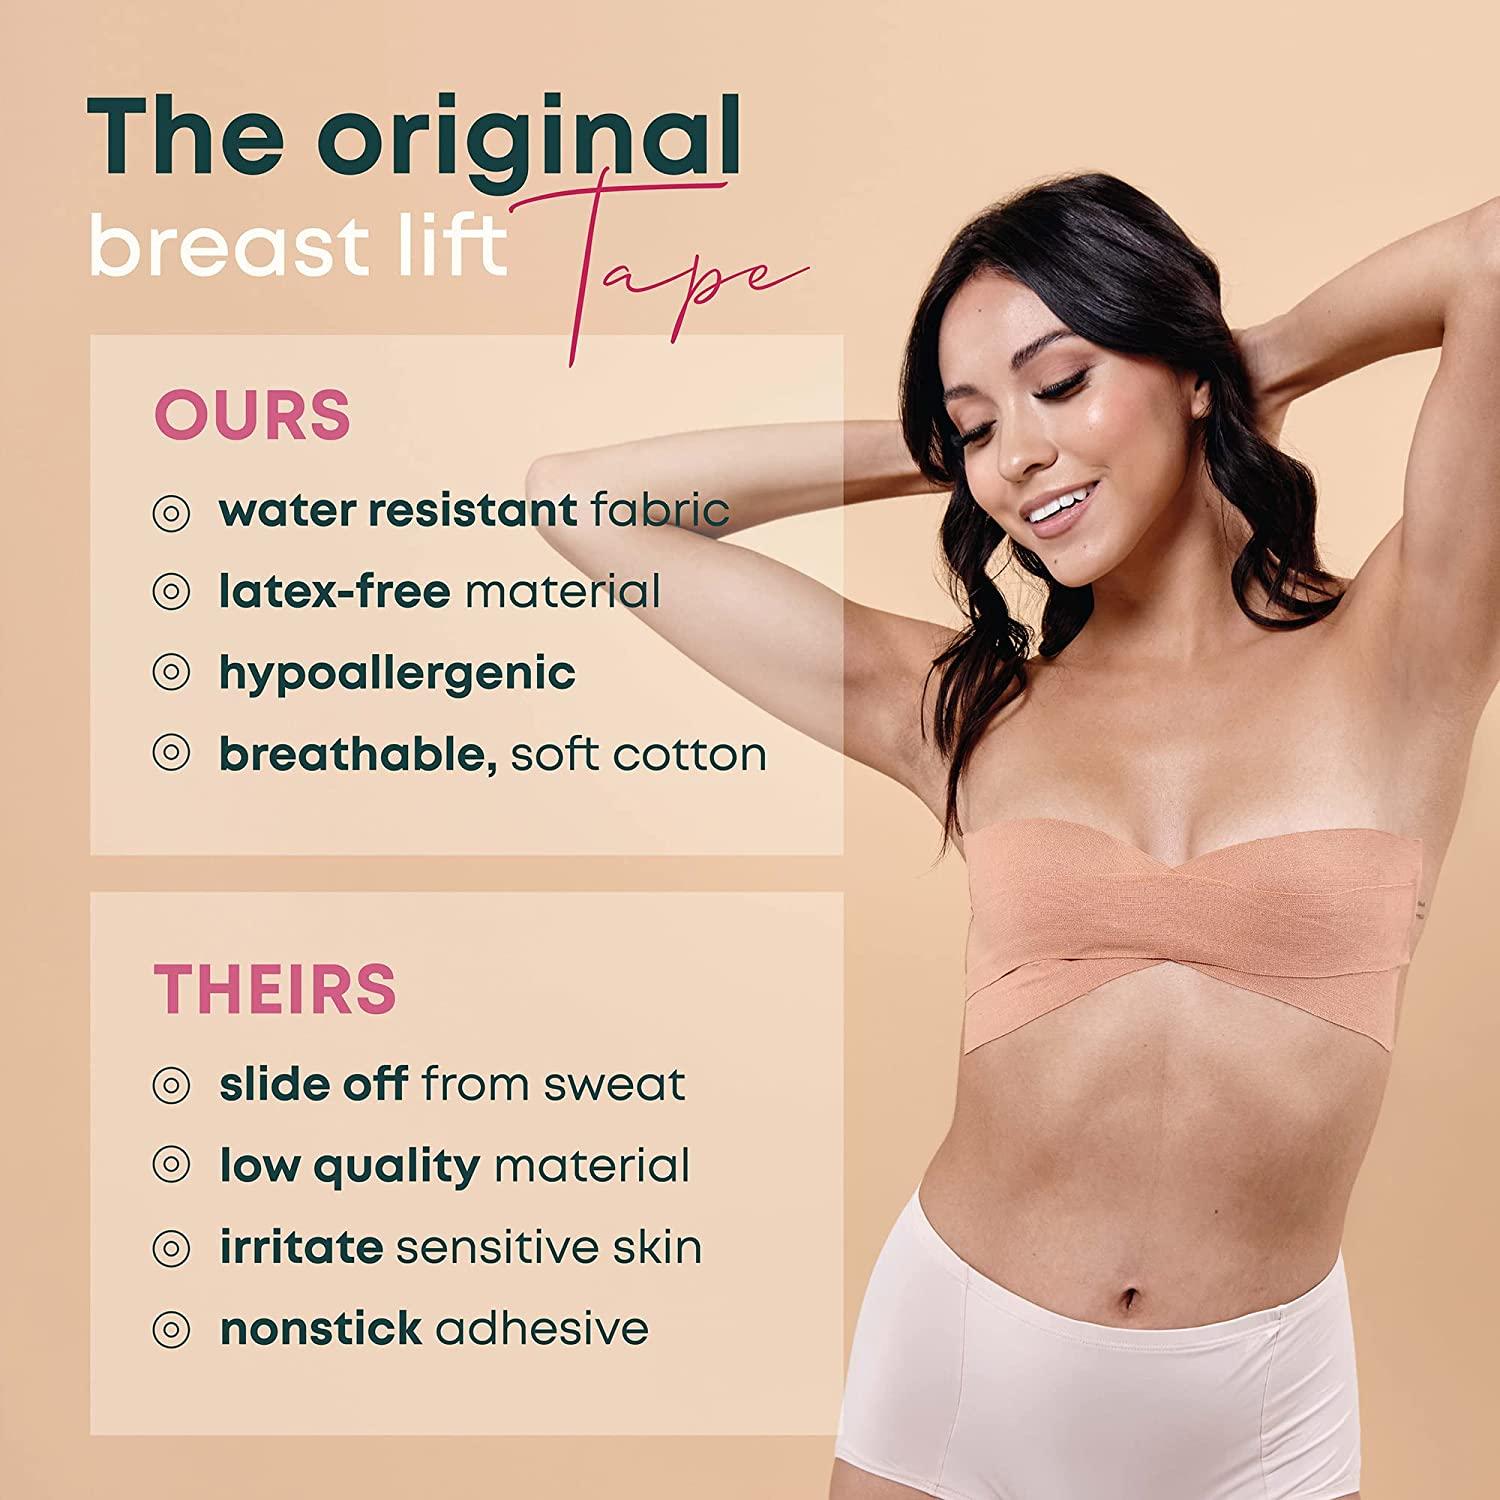 Boob Tape Boobytape for Breast Lift, Achieve Chest Brace Lift & Contour of  Breasts, Sticky Body Tape for Push up & Shape in All Clothing Fabric Dress  Types